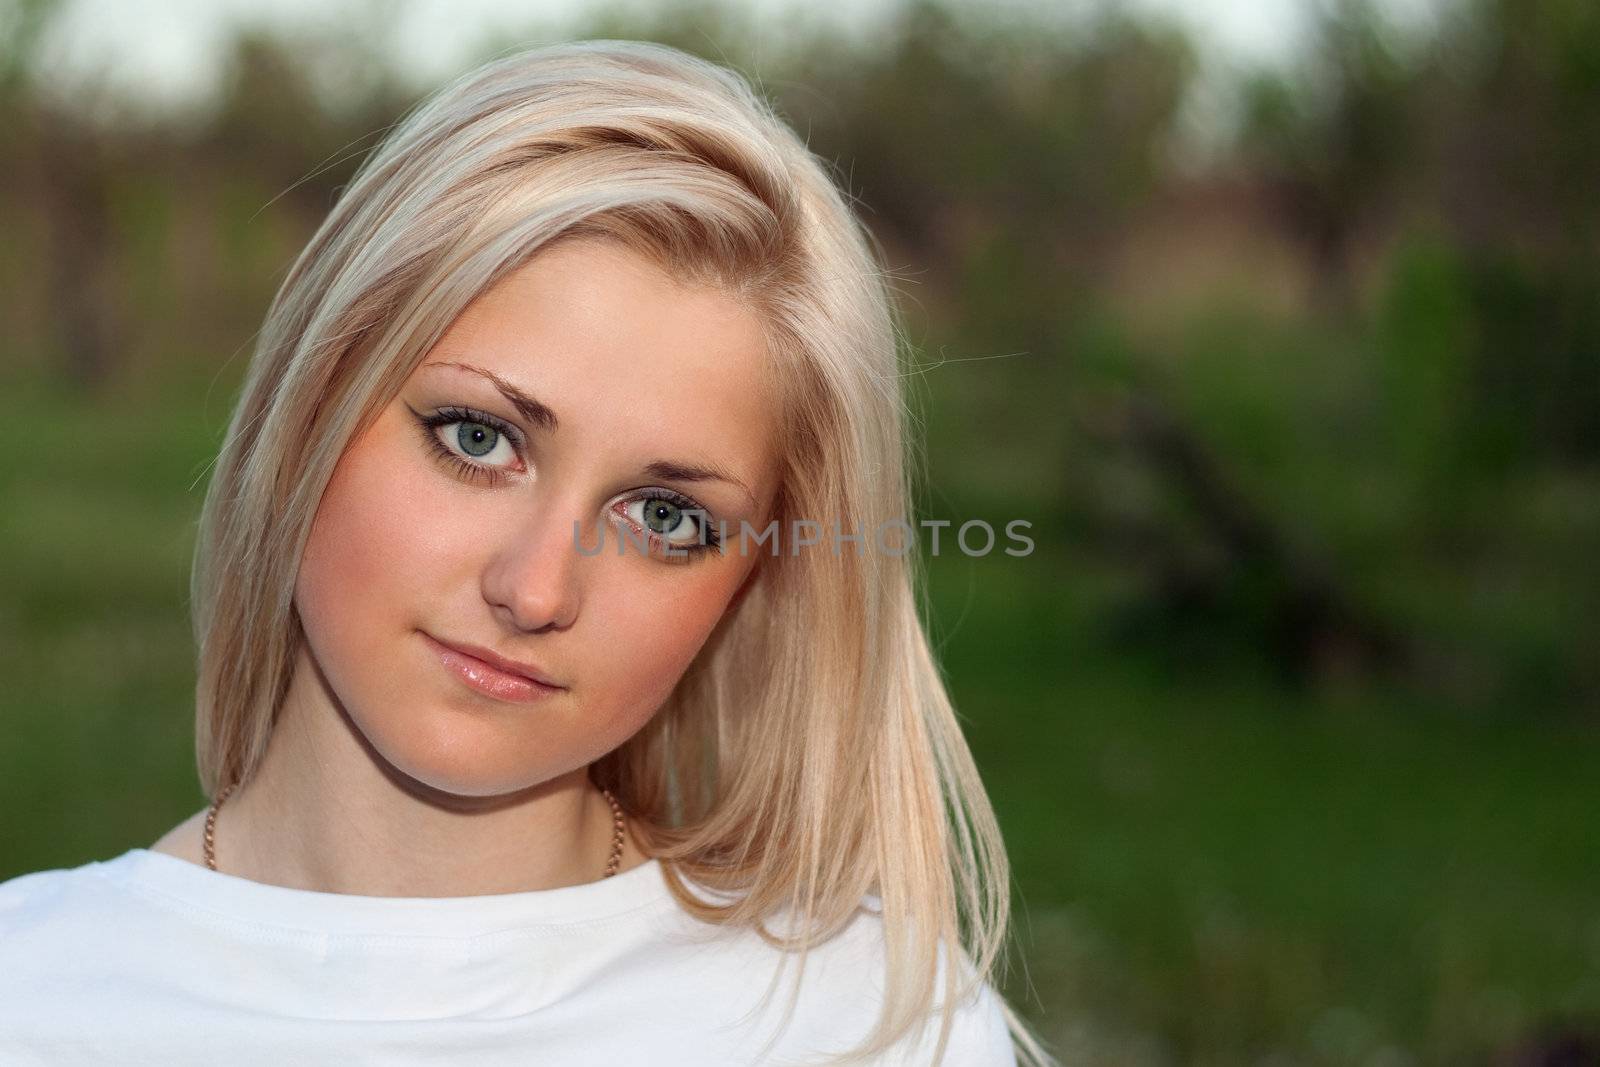 Closeup portrait of young lovely blonde outdoors